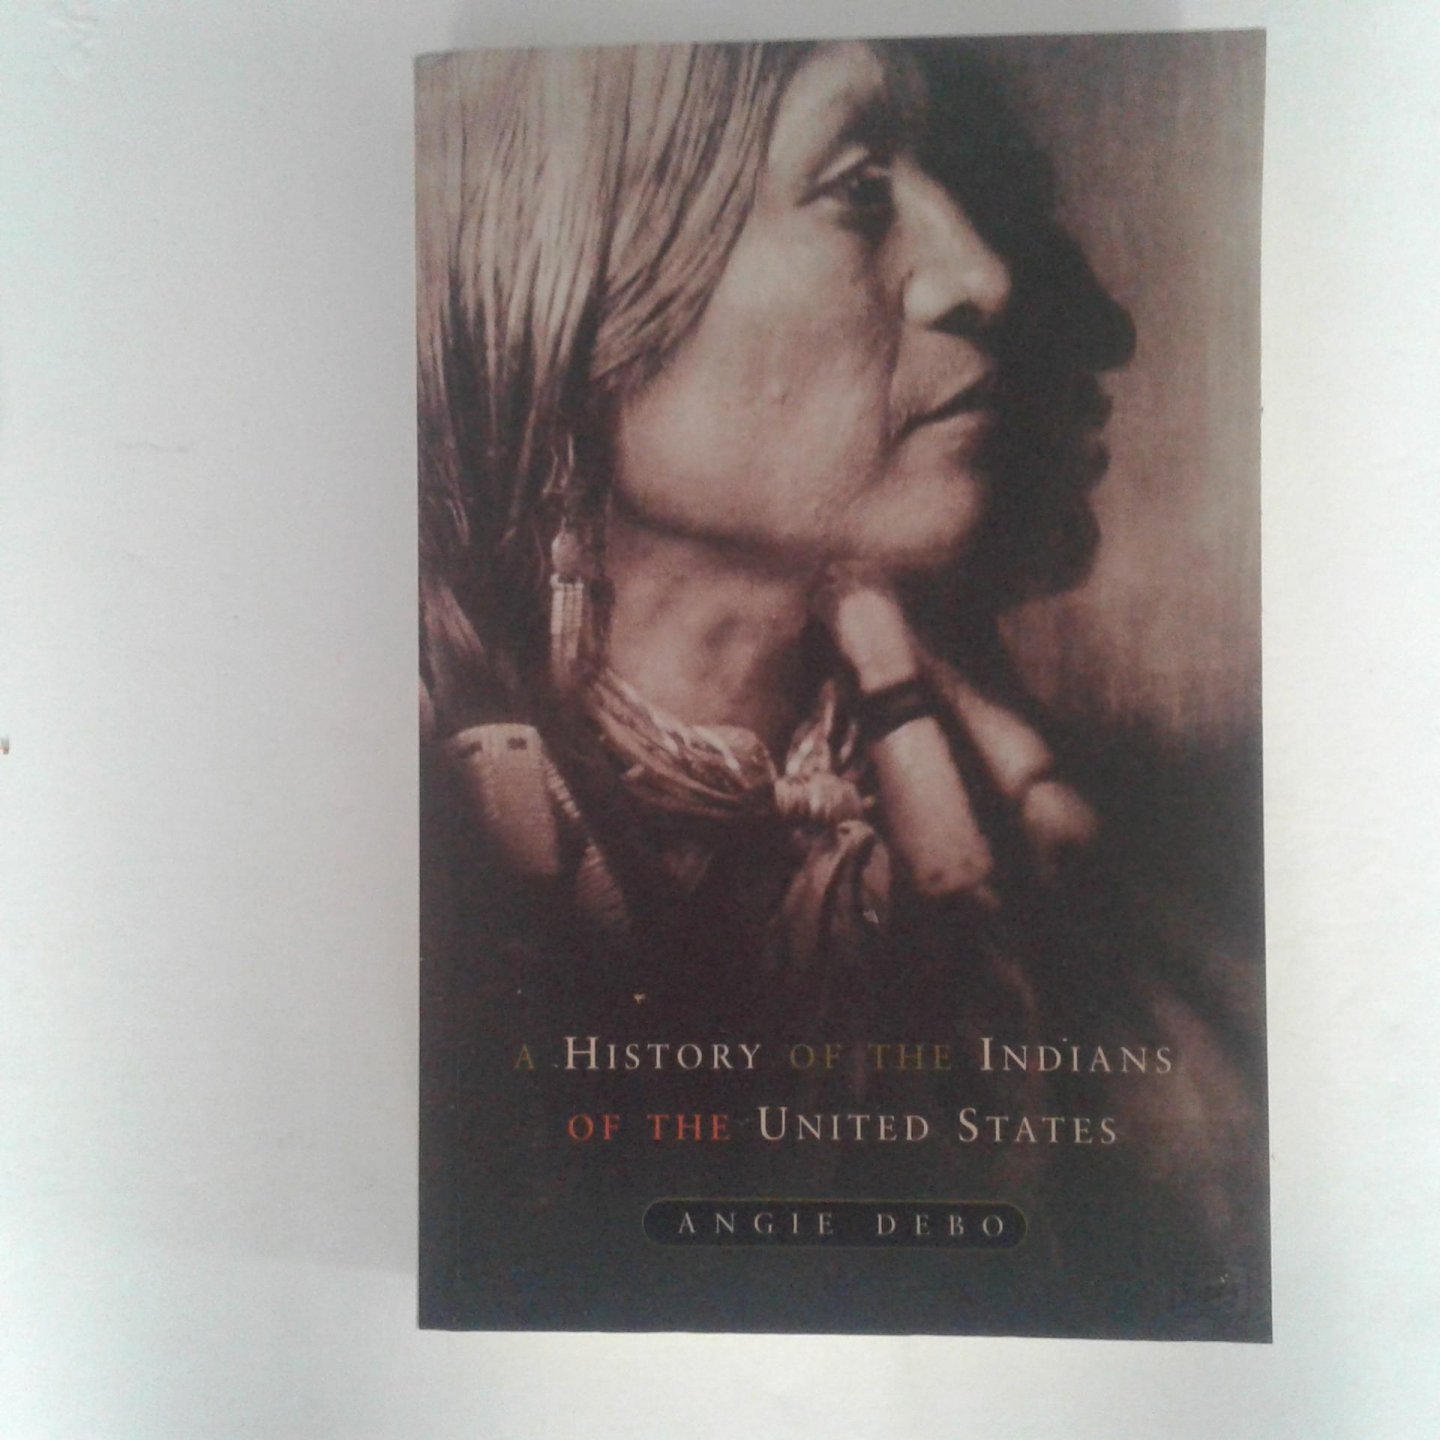 Debo, Angie - A History of the Indians of the United States